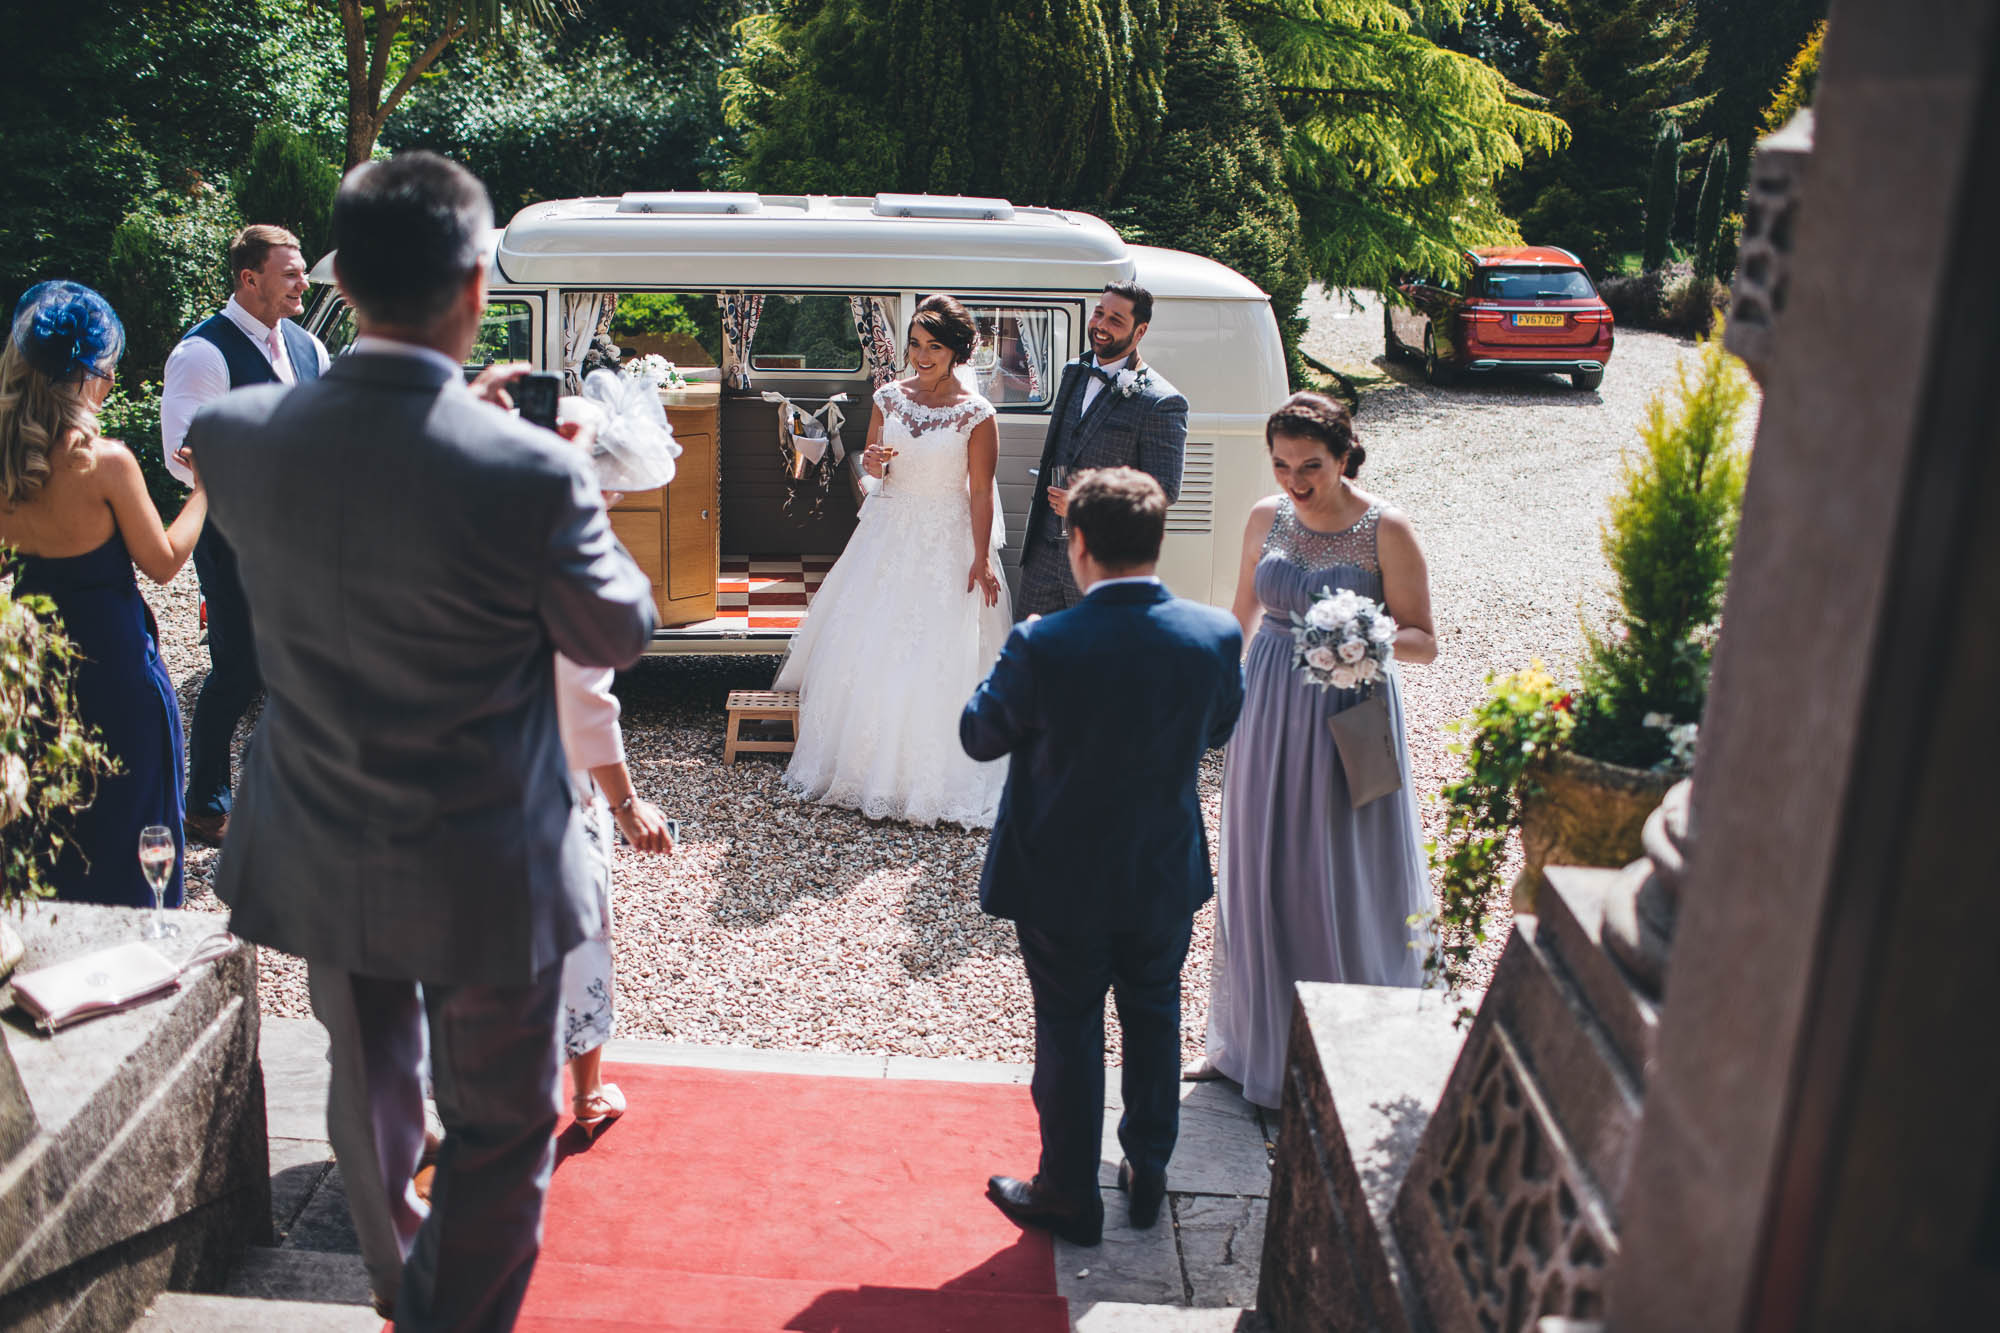 Just married couple are greeted by guests as they arrive at wedding reception